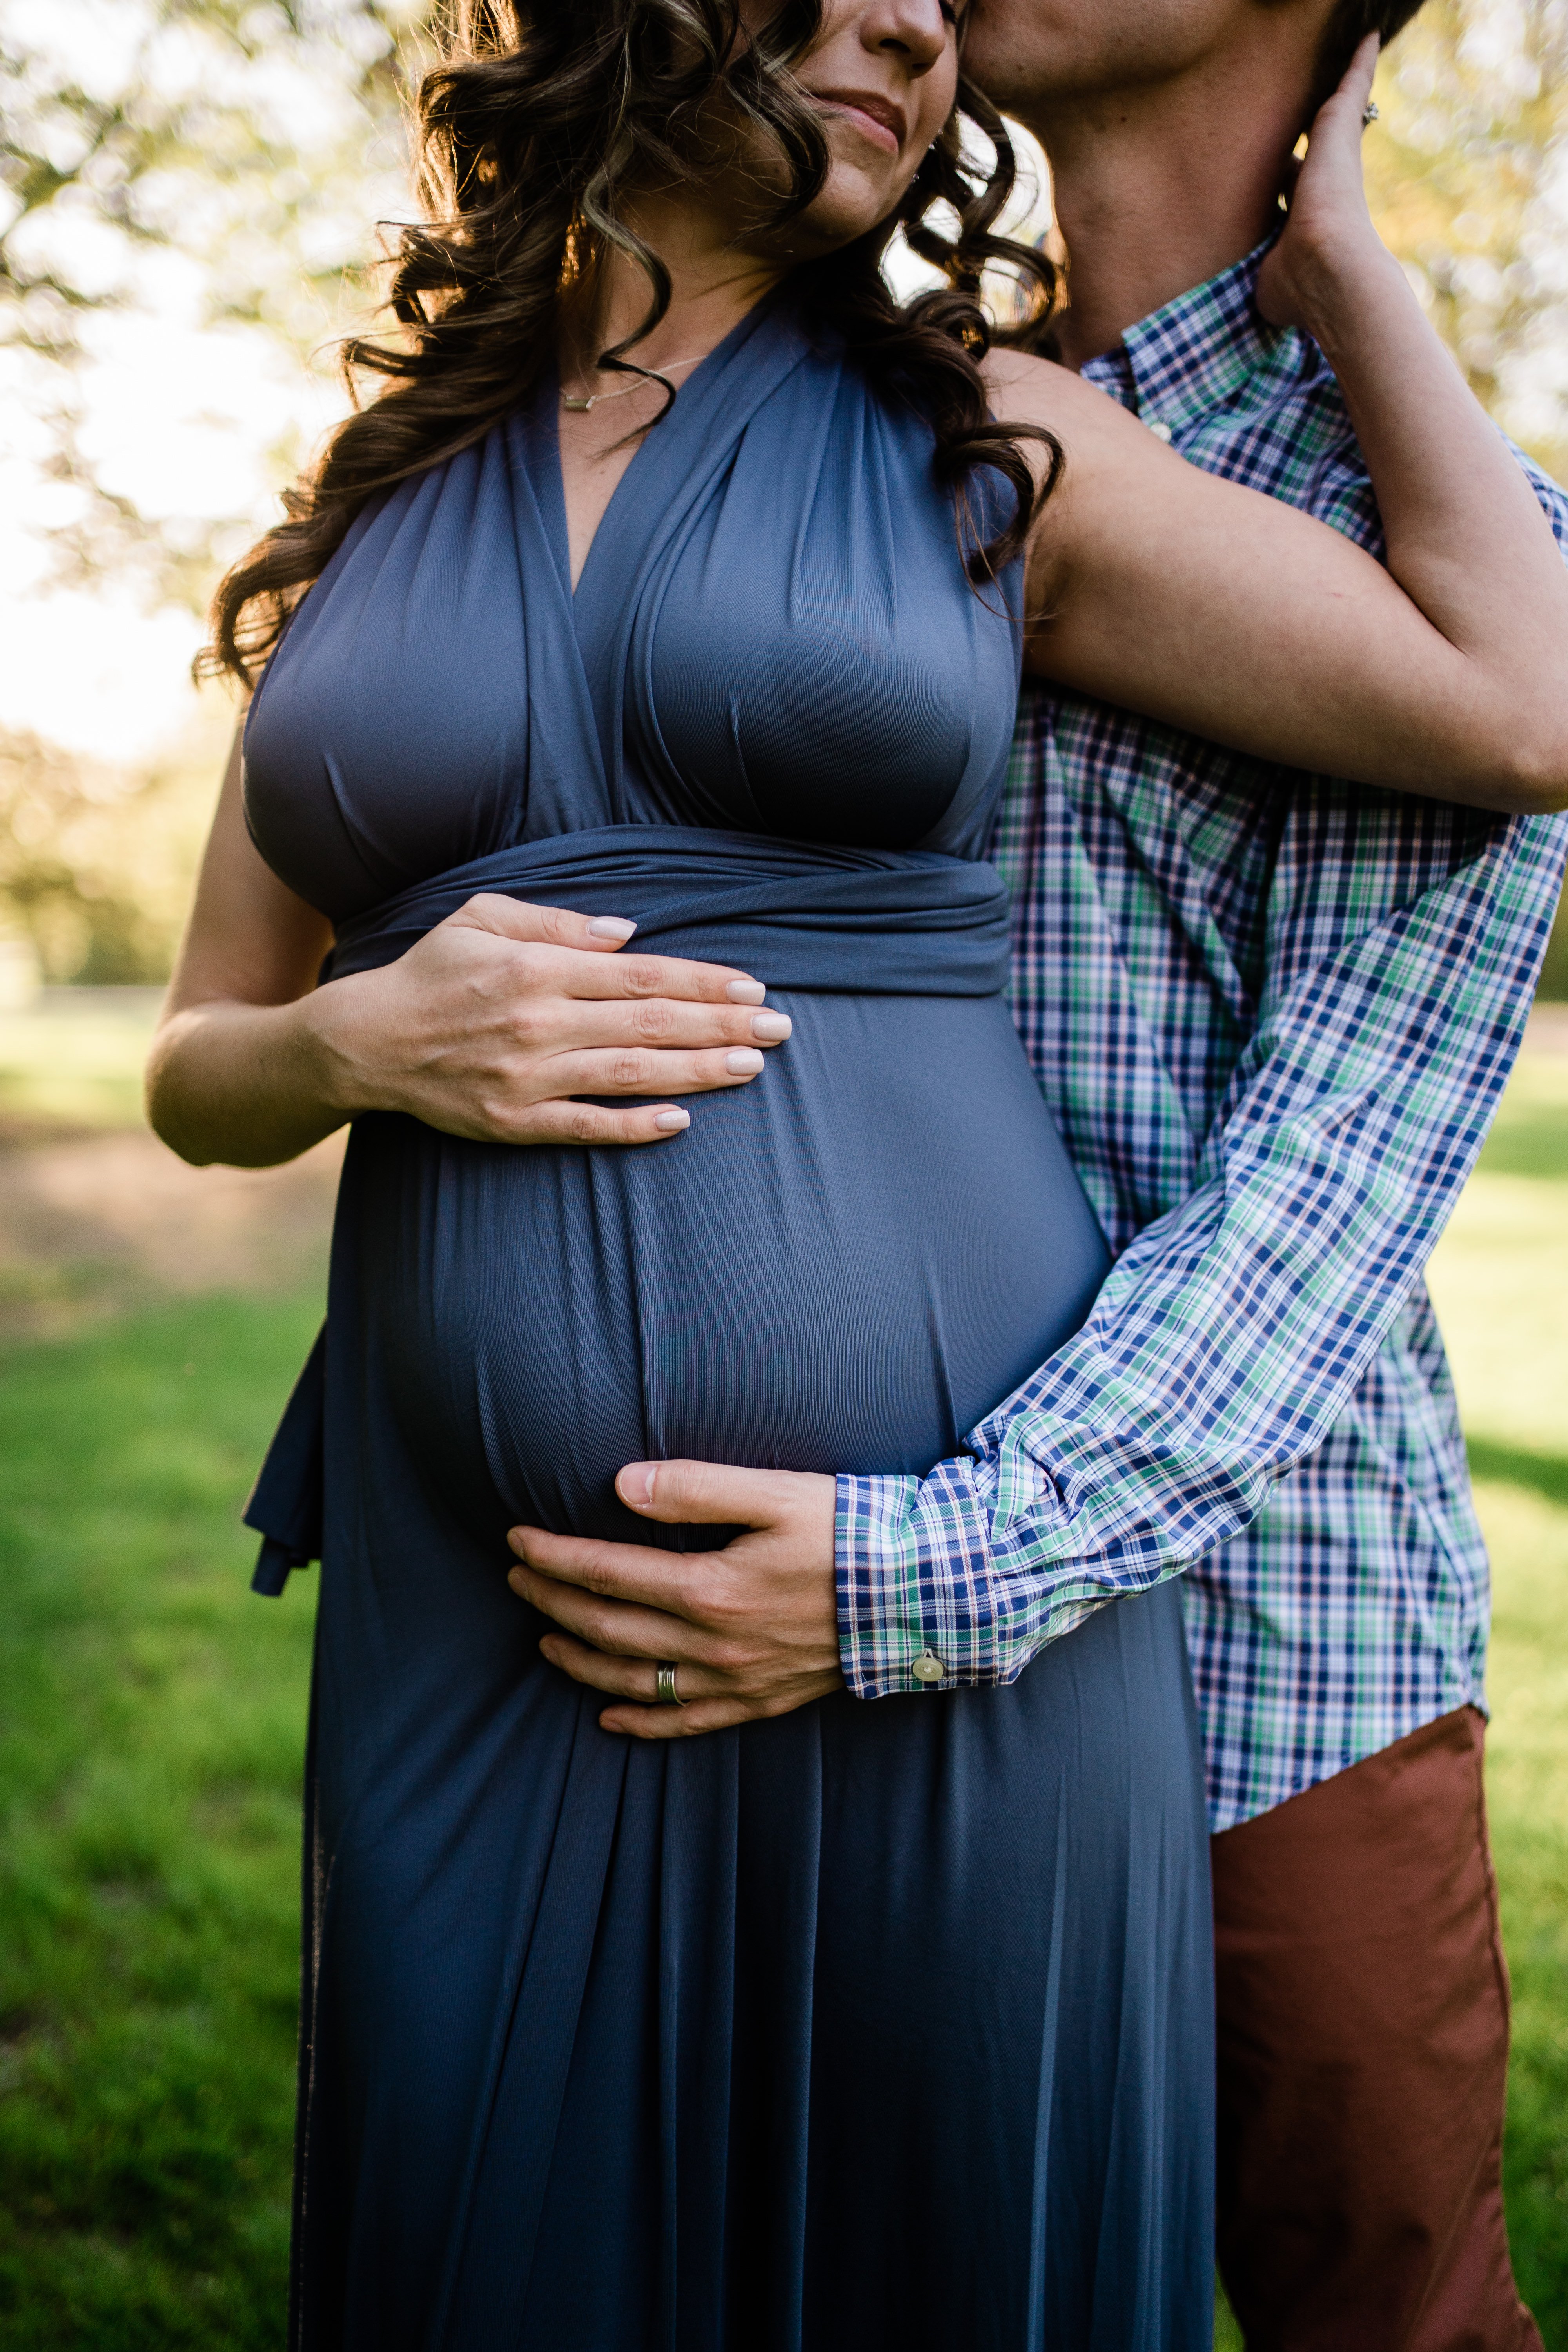 husband standing behind his wife and holding her baby bump as she reach back to caress his face